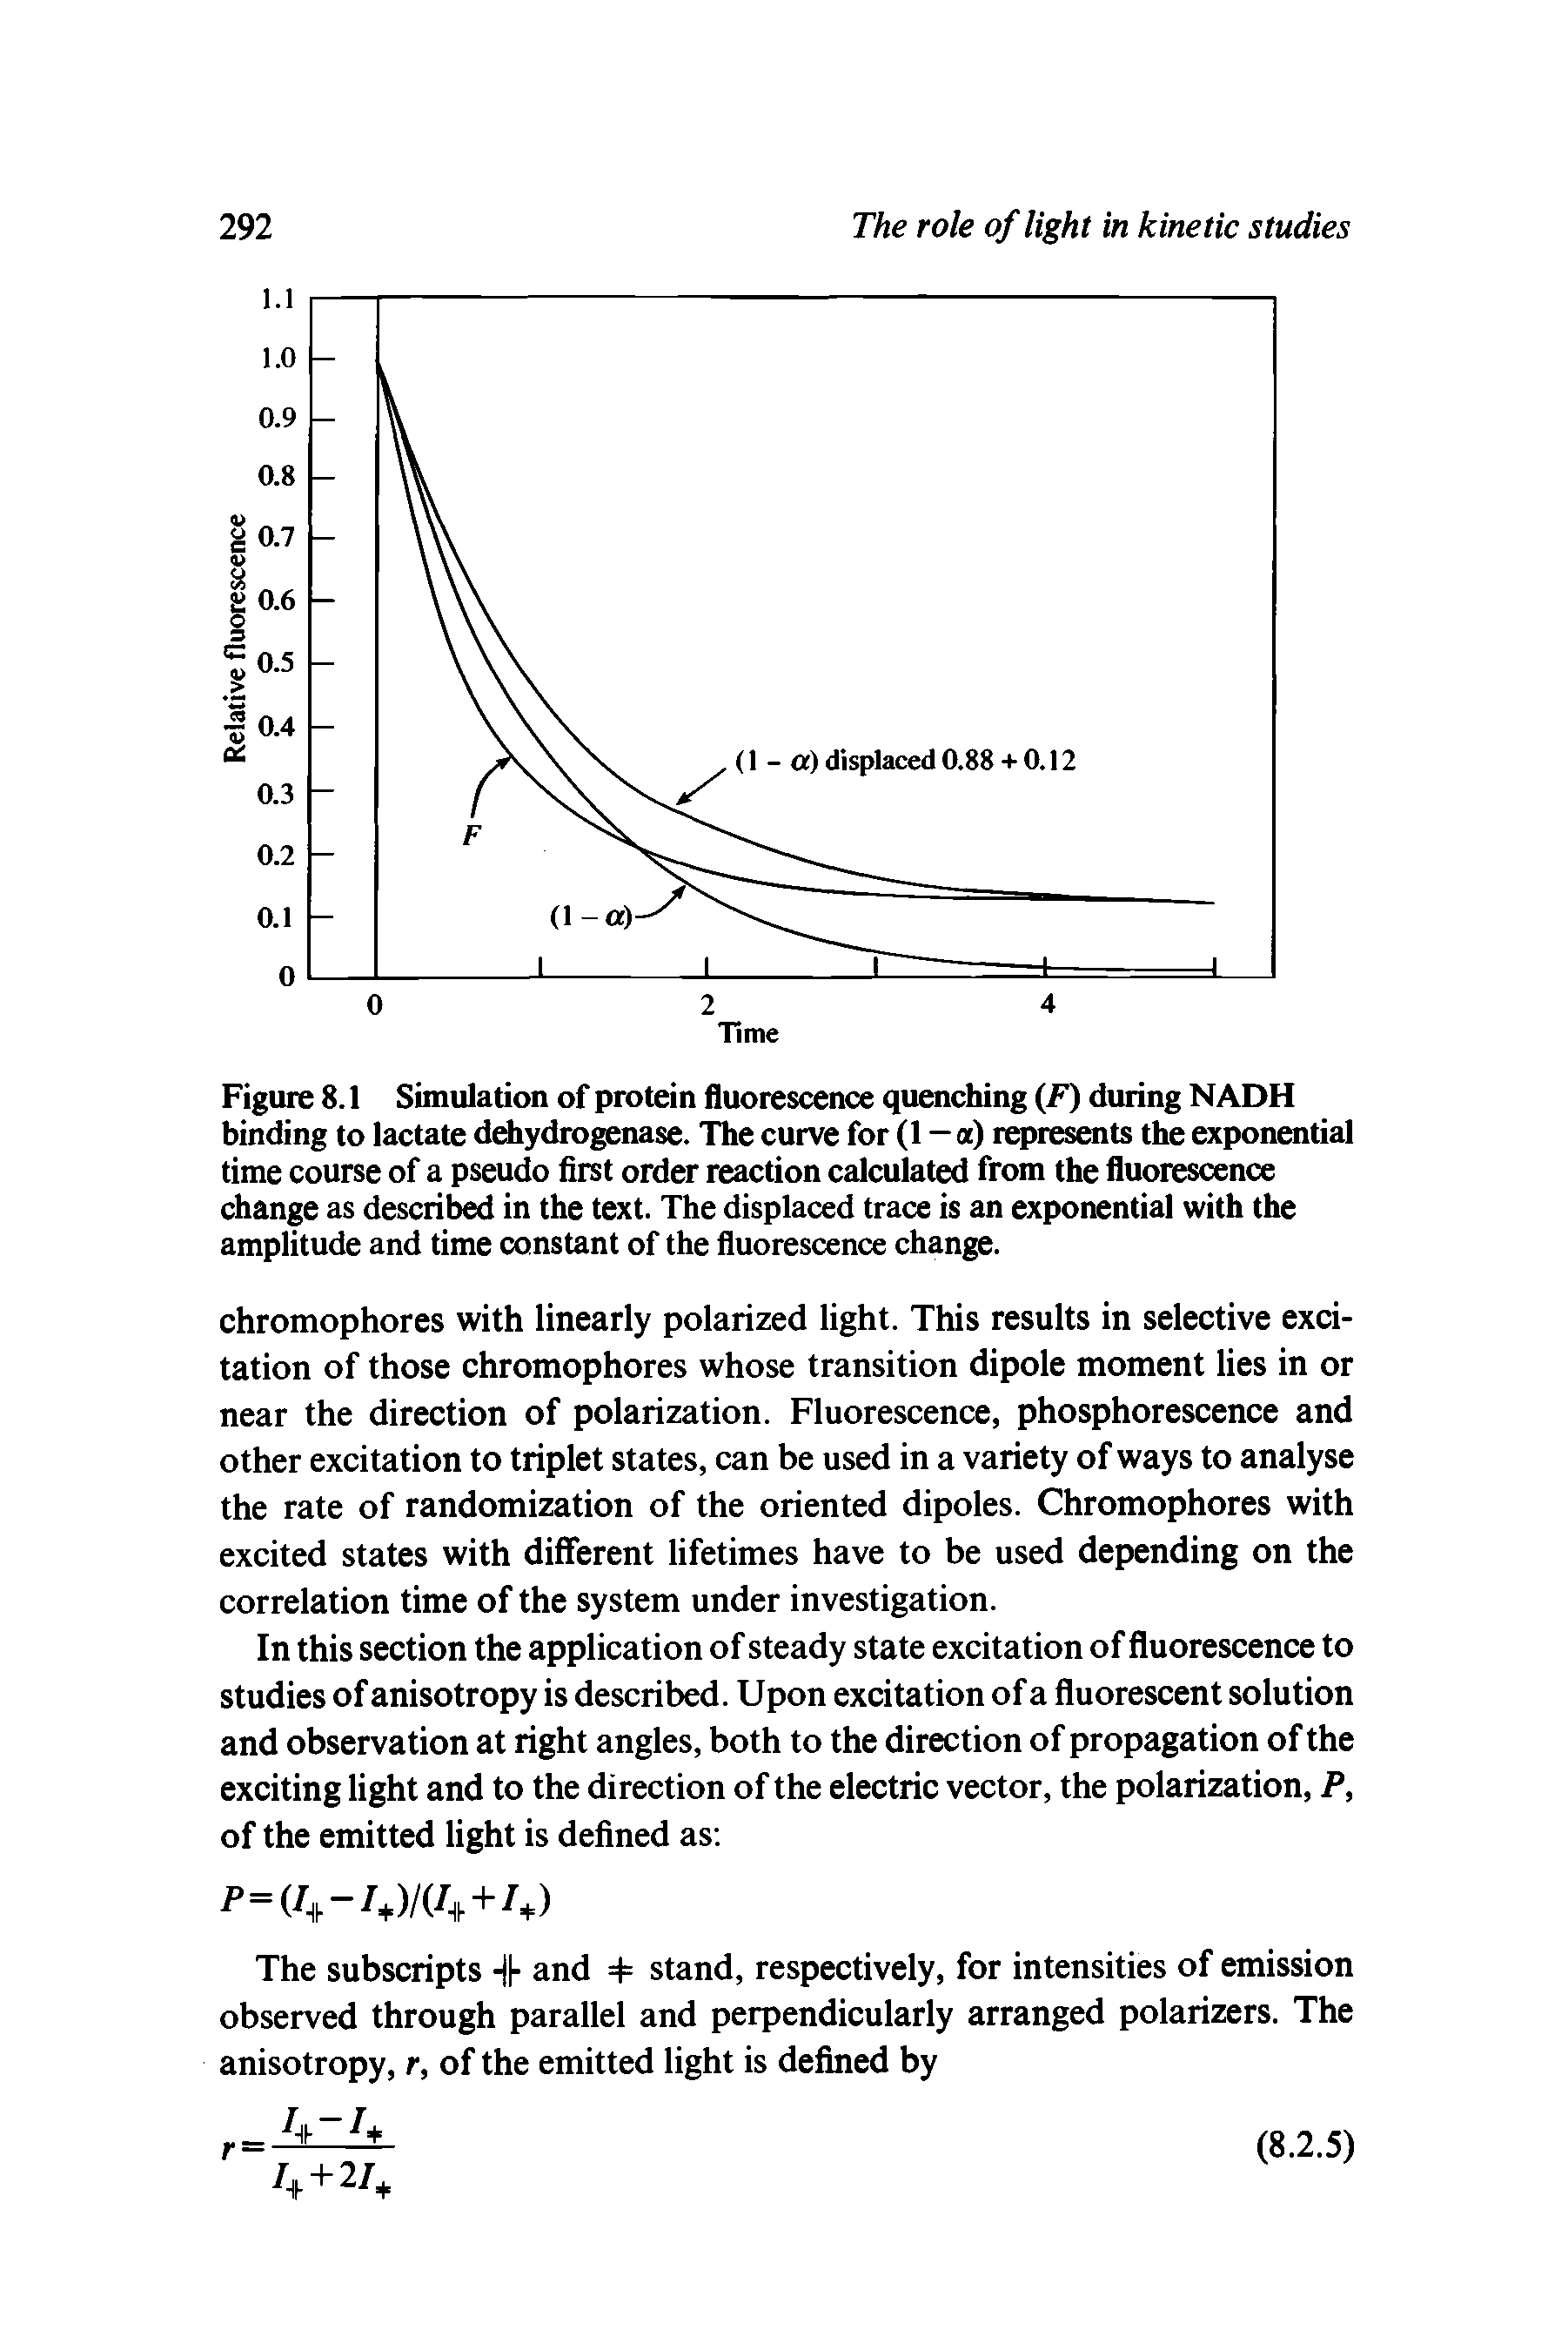 Figure 8.1 Simulation of protein fluorescence quenching (F) during NADH binding to lactate dehydrogenase. The curve for (1 — a) rqnesents the exponential time course of a pseudo first order reaction calculated from the fluorescence change as described in the text. The displaced trace is an exponential with the amplitude and time constant of the fluorescence change.